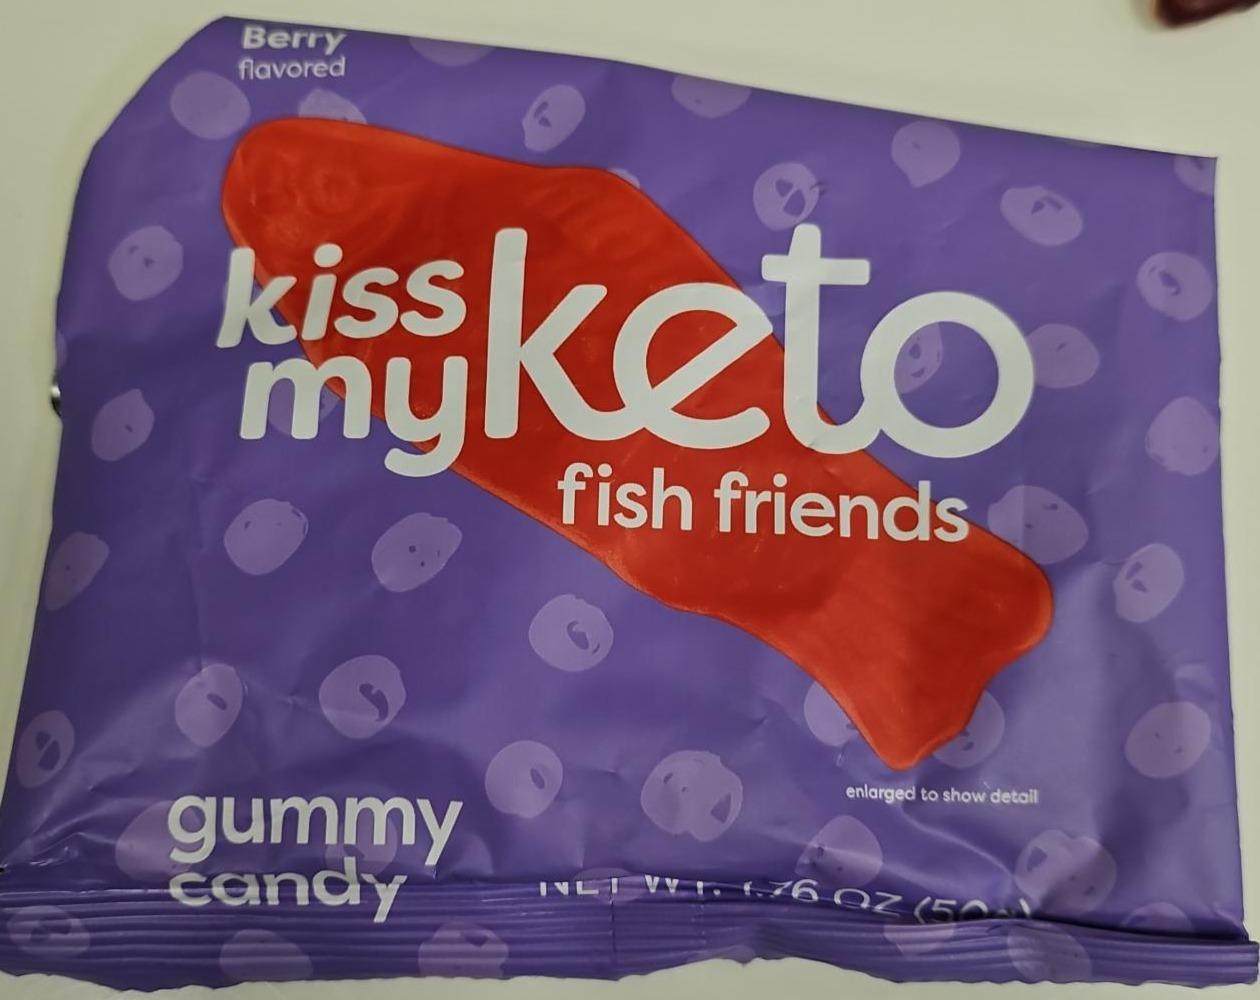 Fotografie - Fish Friends gummy candy Berry flavored Kiss My Keto